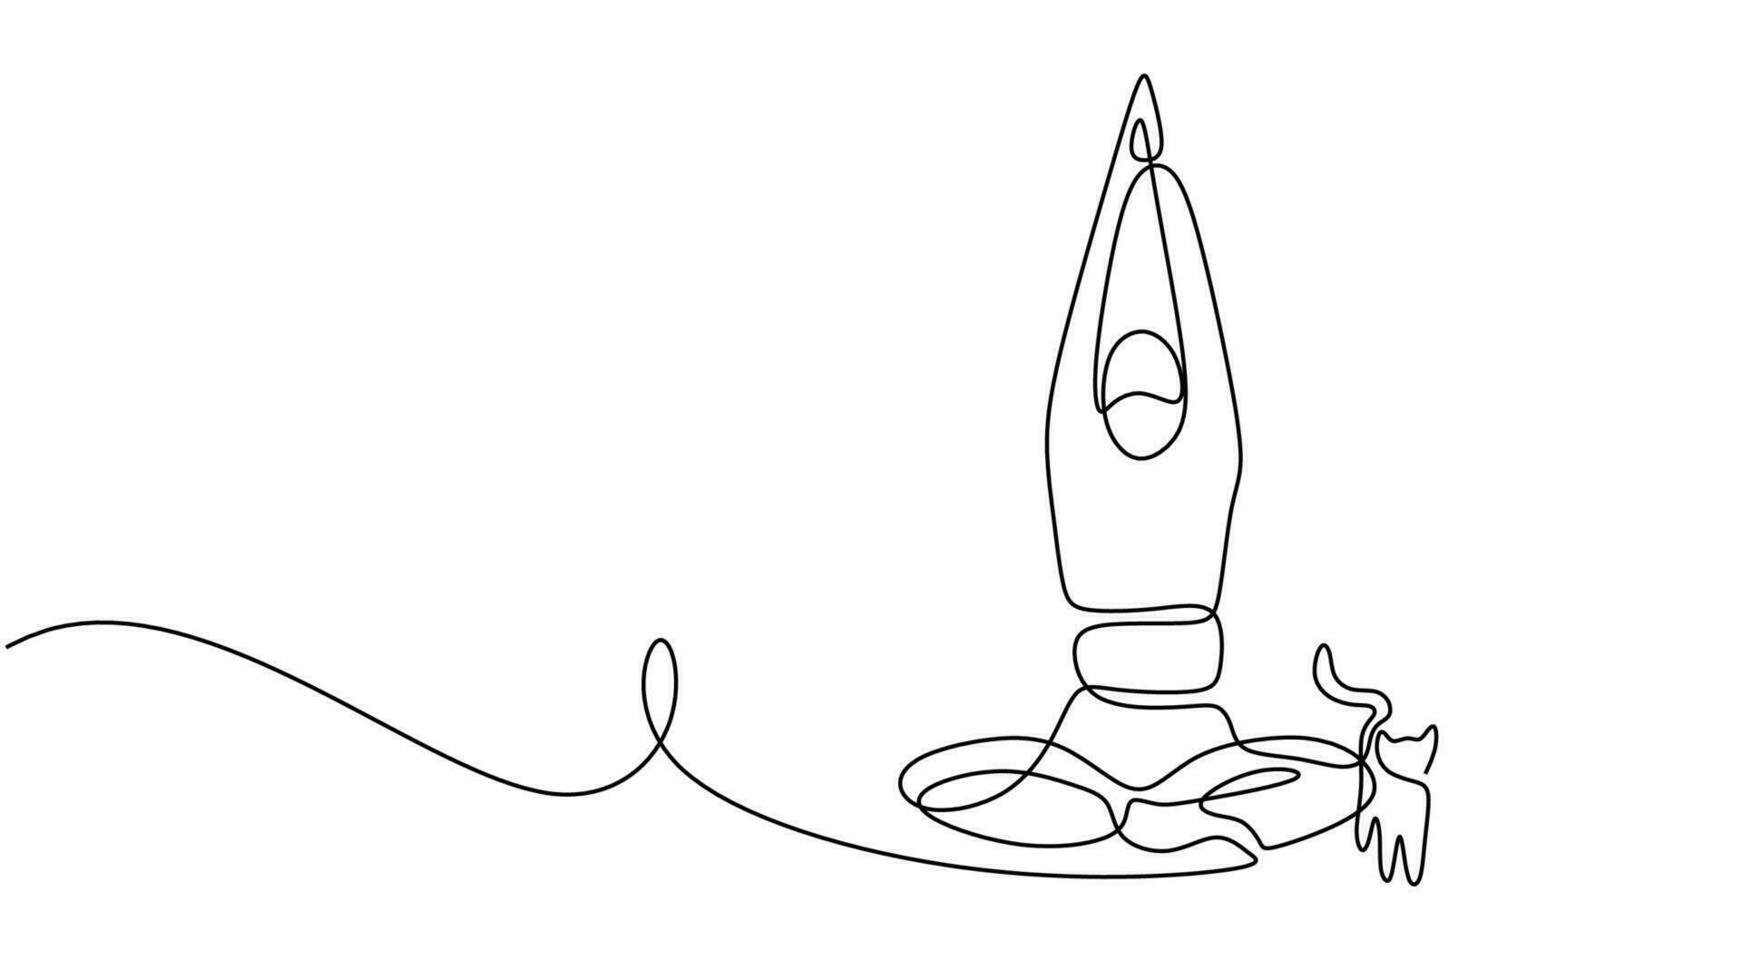 Yoga pose woman, one line drawing minimalist with cat animal. vector